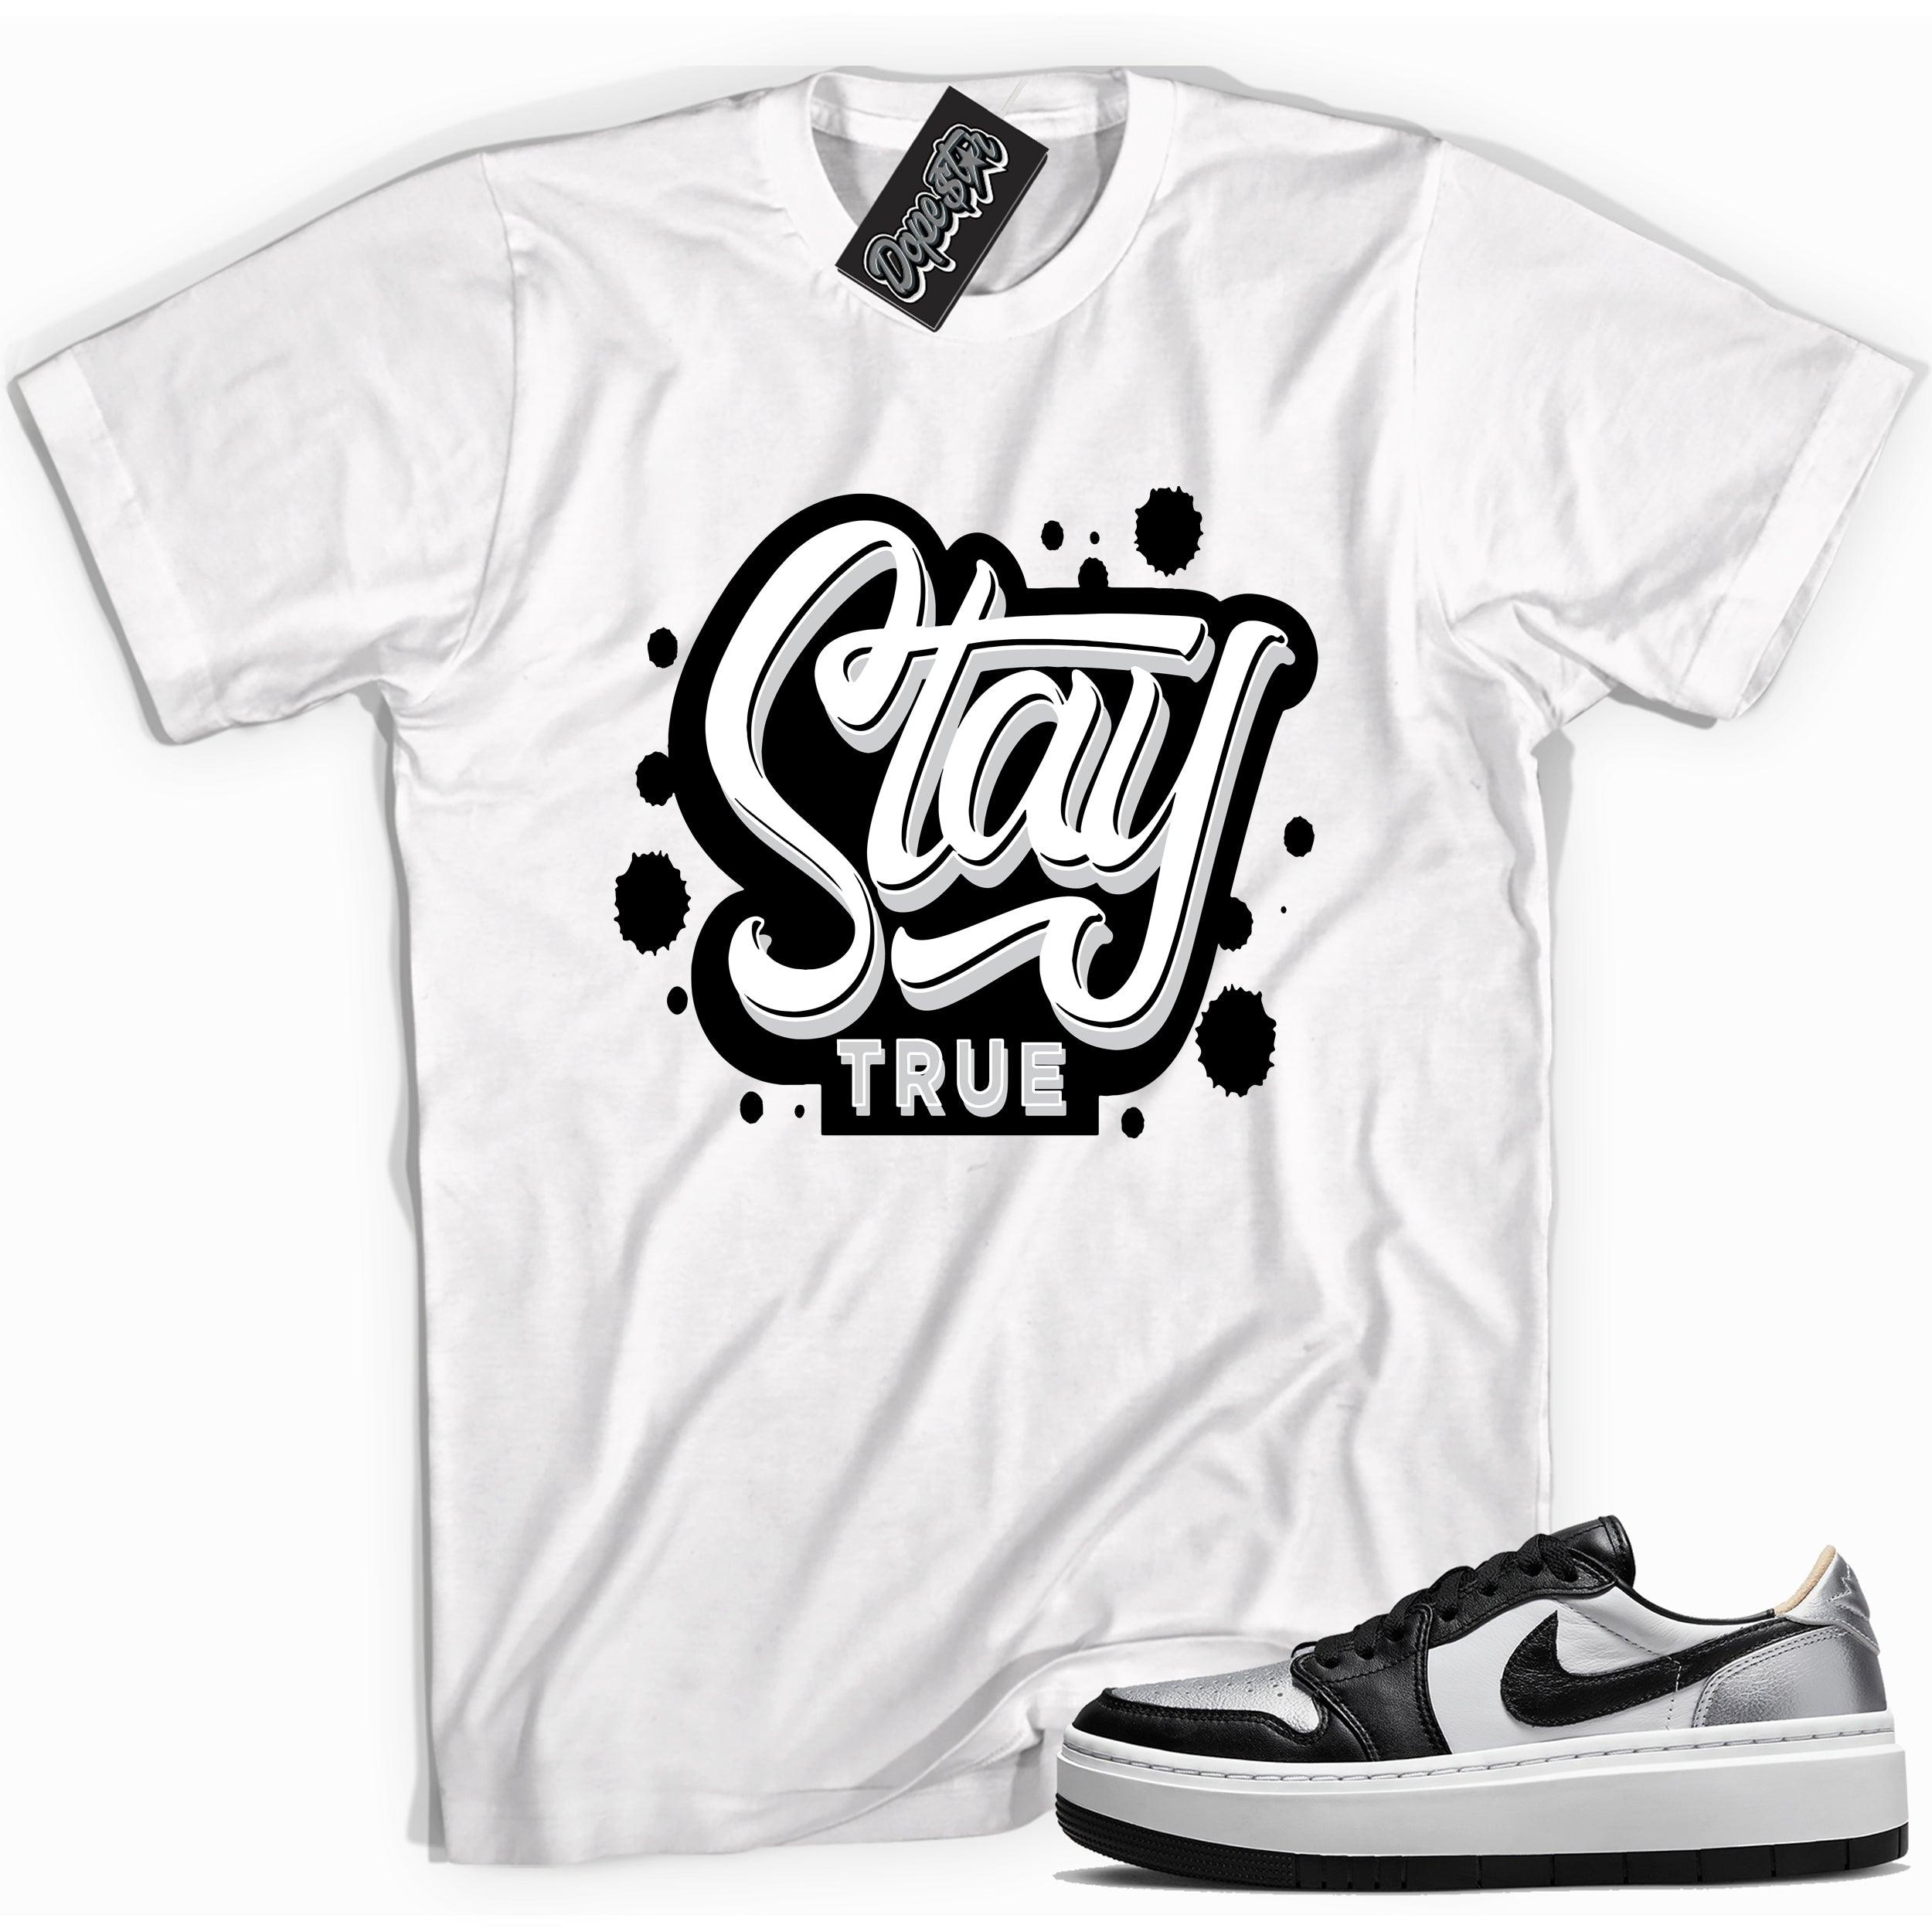 Cool white graphic tee with 'stay true' print, that perfectly matches Air Jordan 1 Elevate Low SE Silver Toe sneakers.